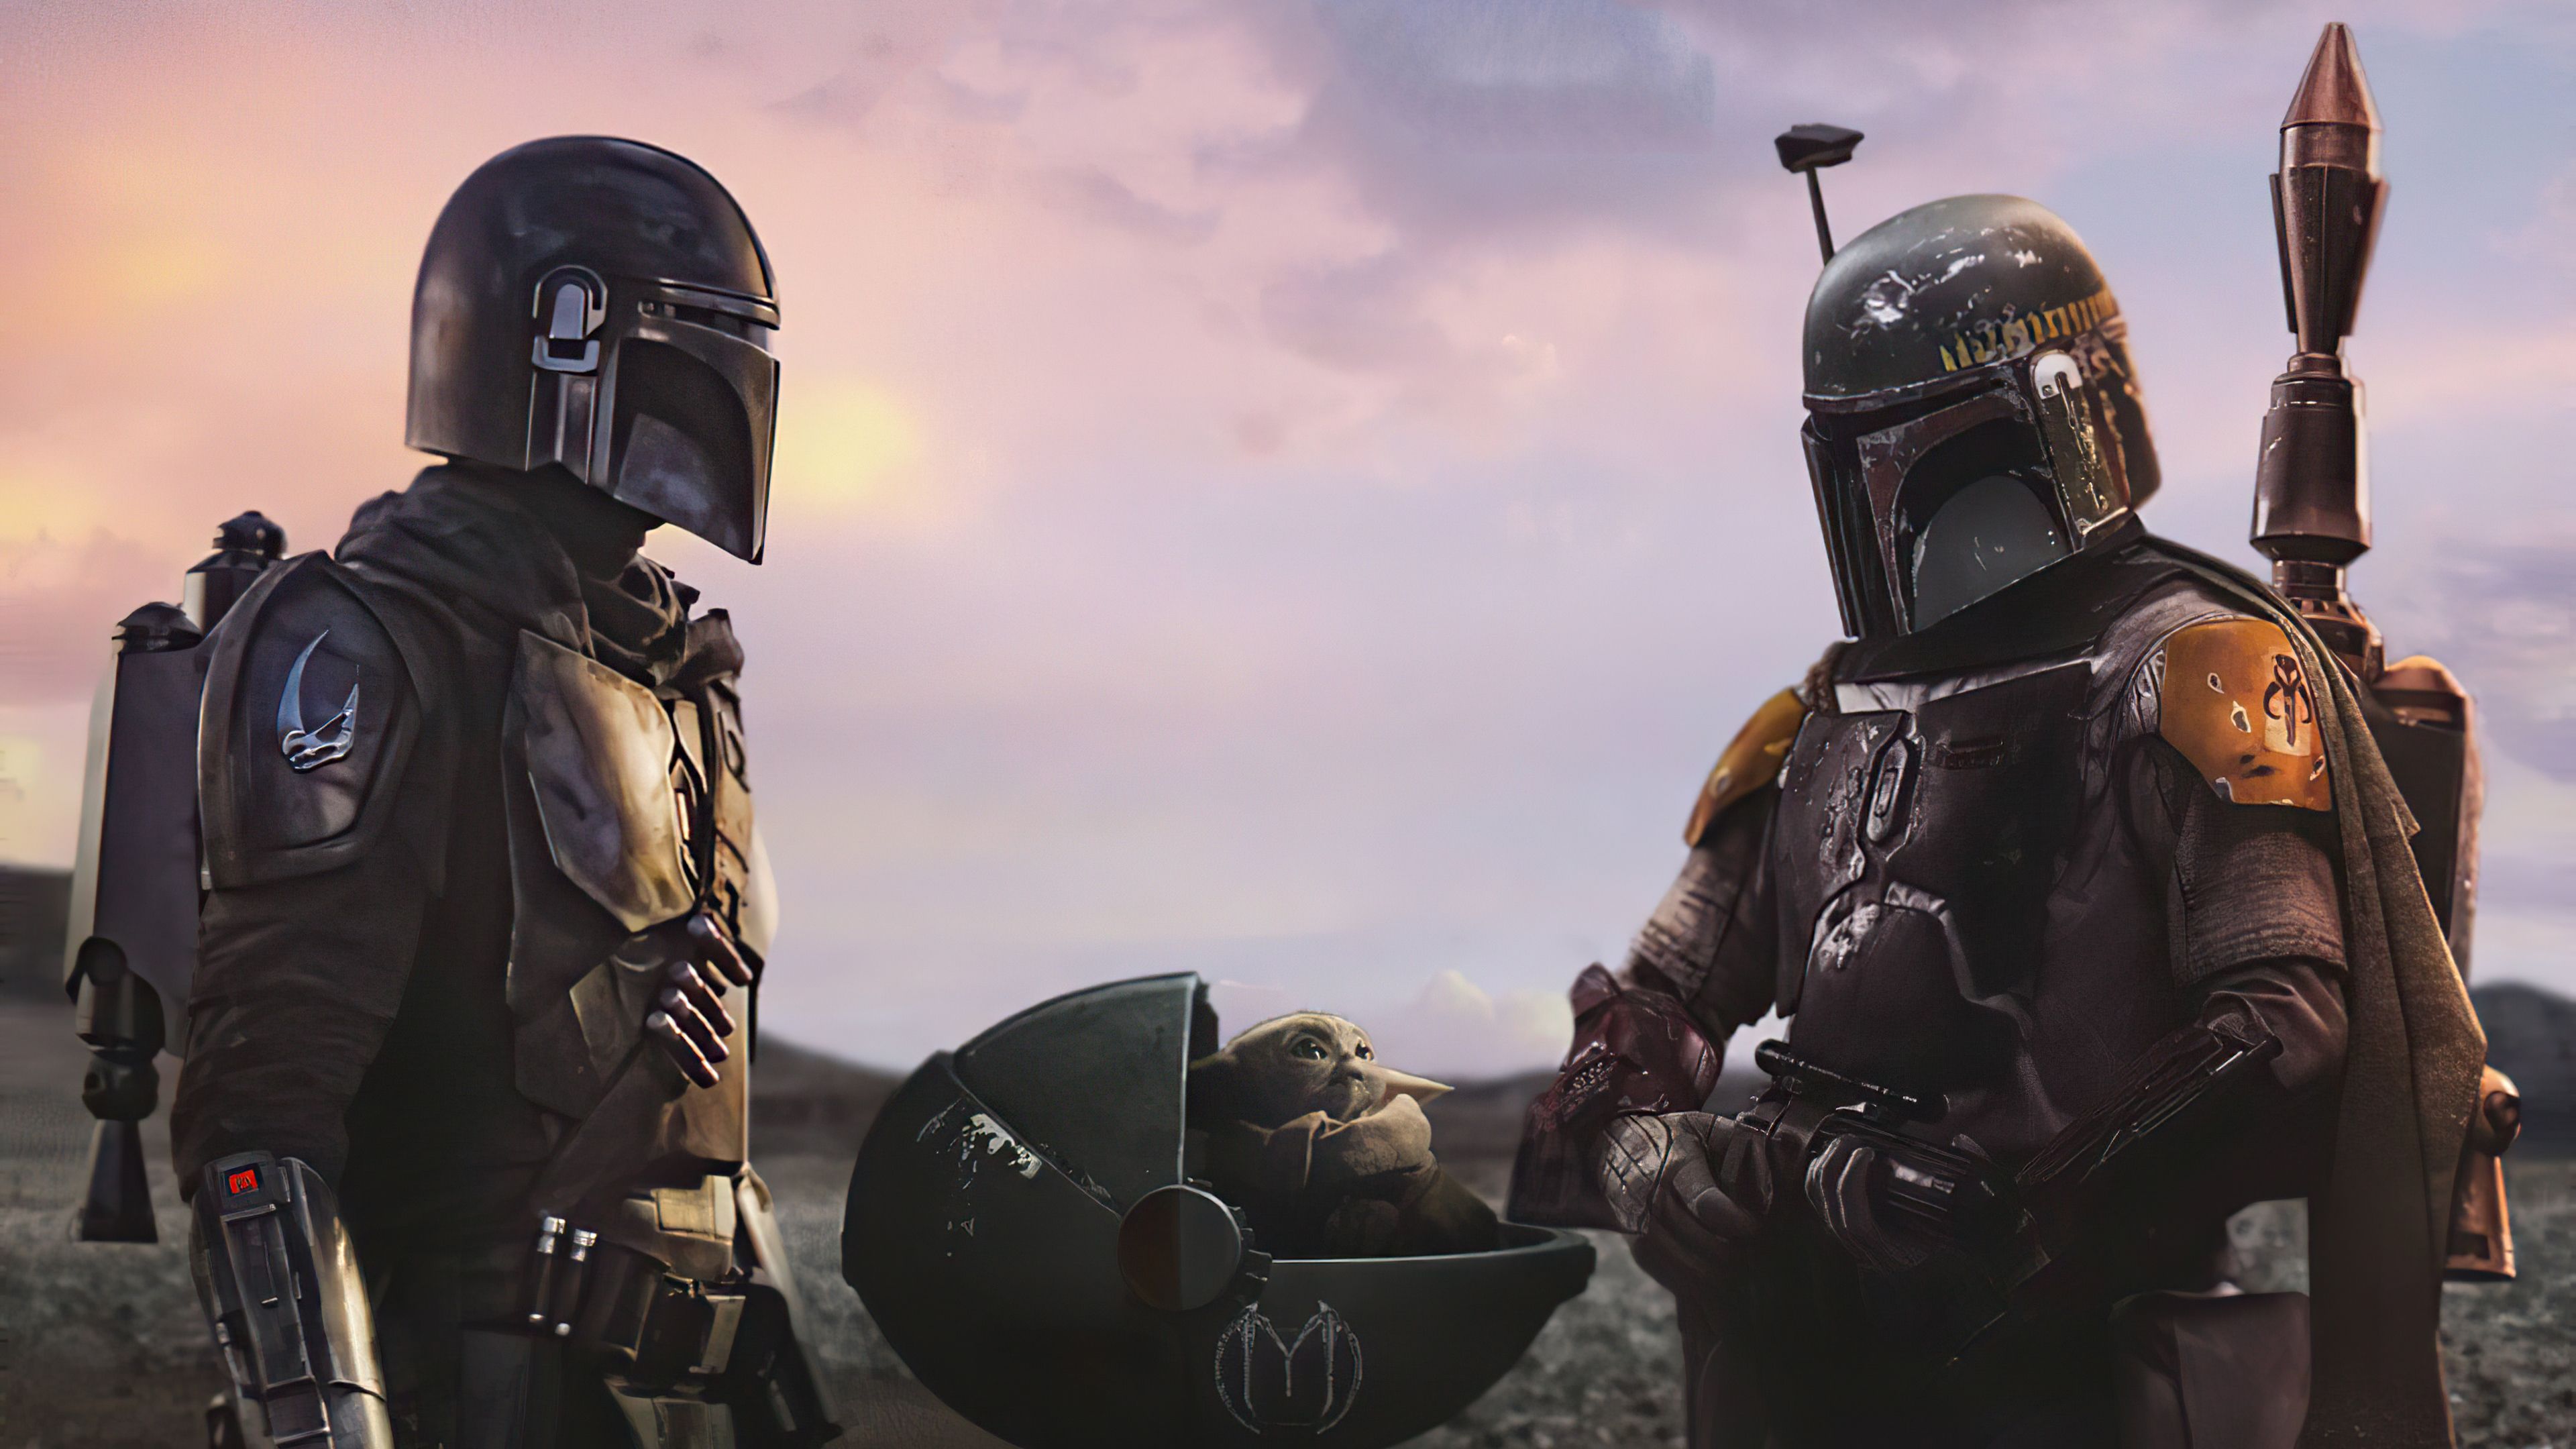 The Mandalorian Season 2 4k, HD Tv Shows, 4k Wallpapers, Image, Backgrounds, Photos and Pictures